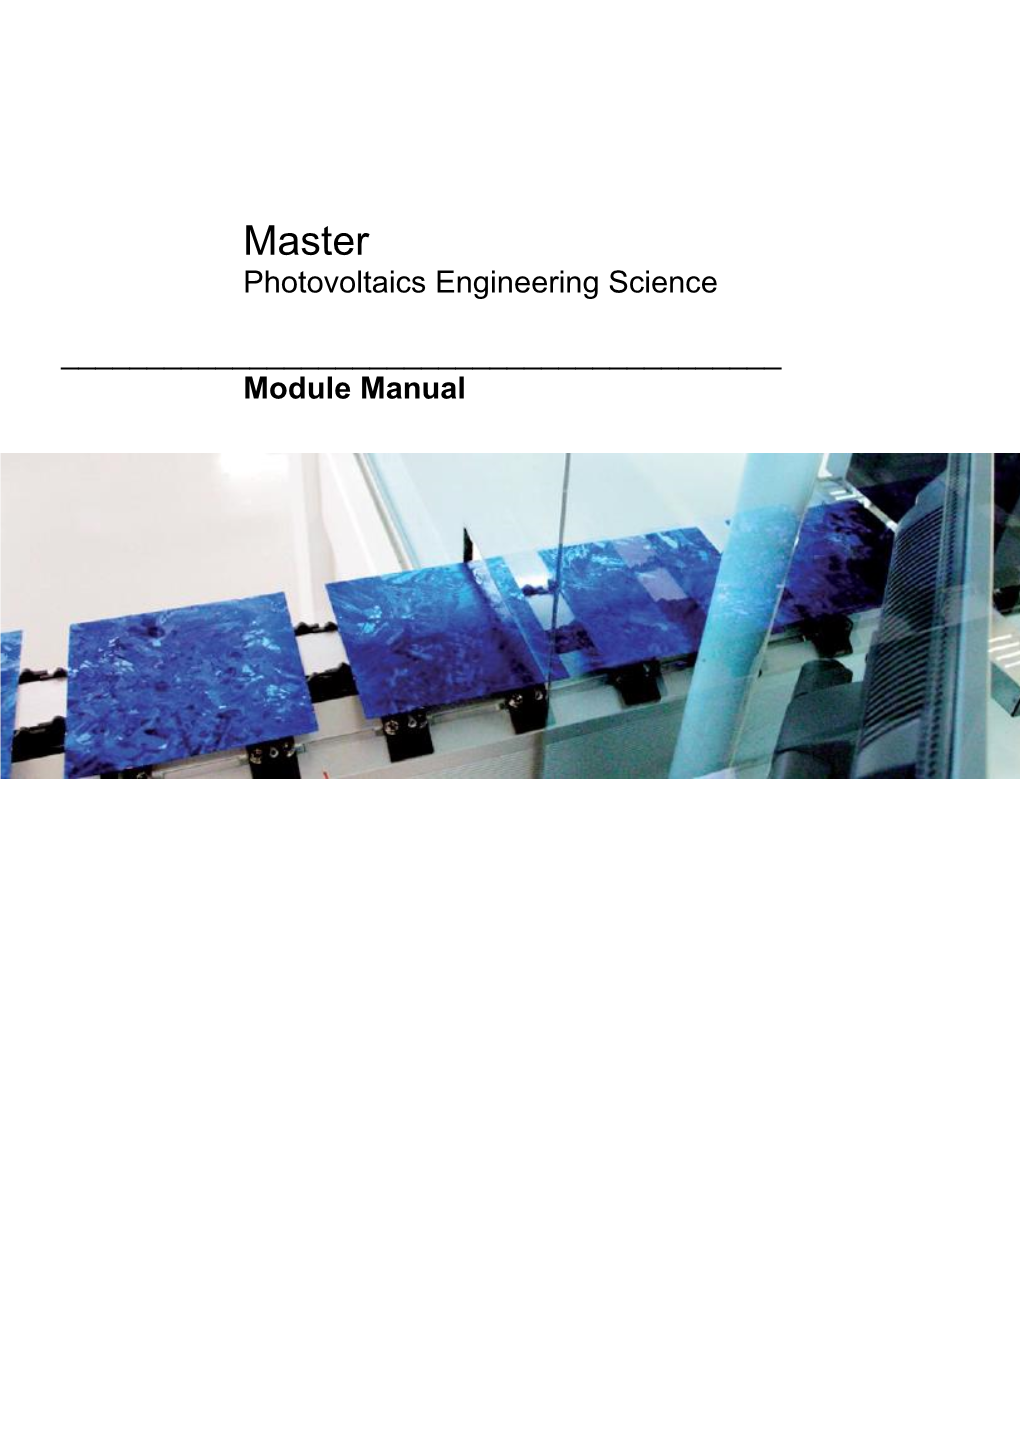 Master Photovoltaics Engineering Science